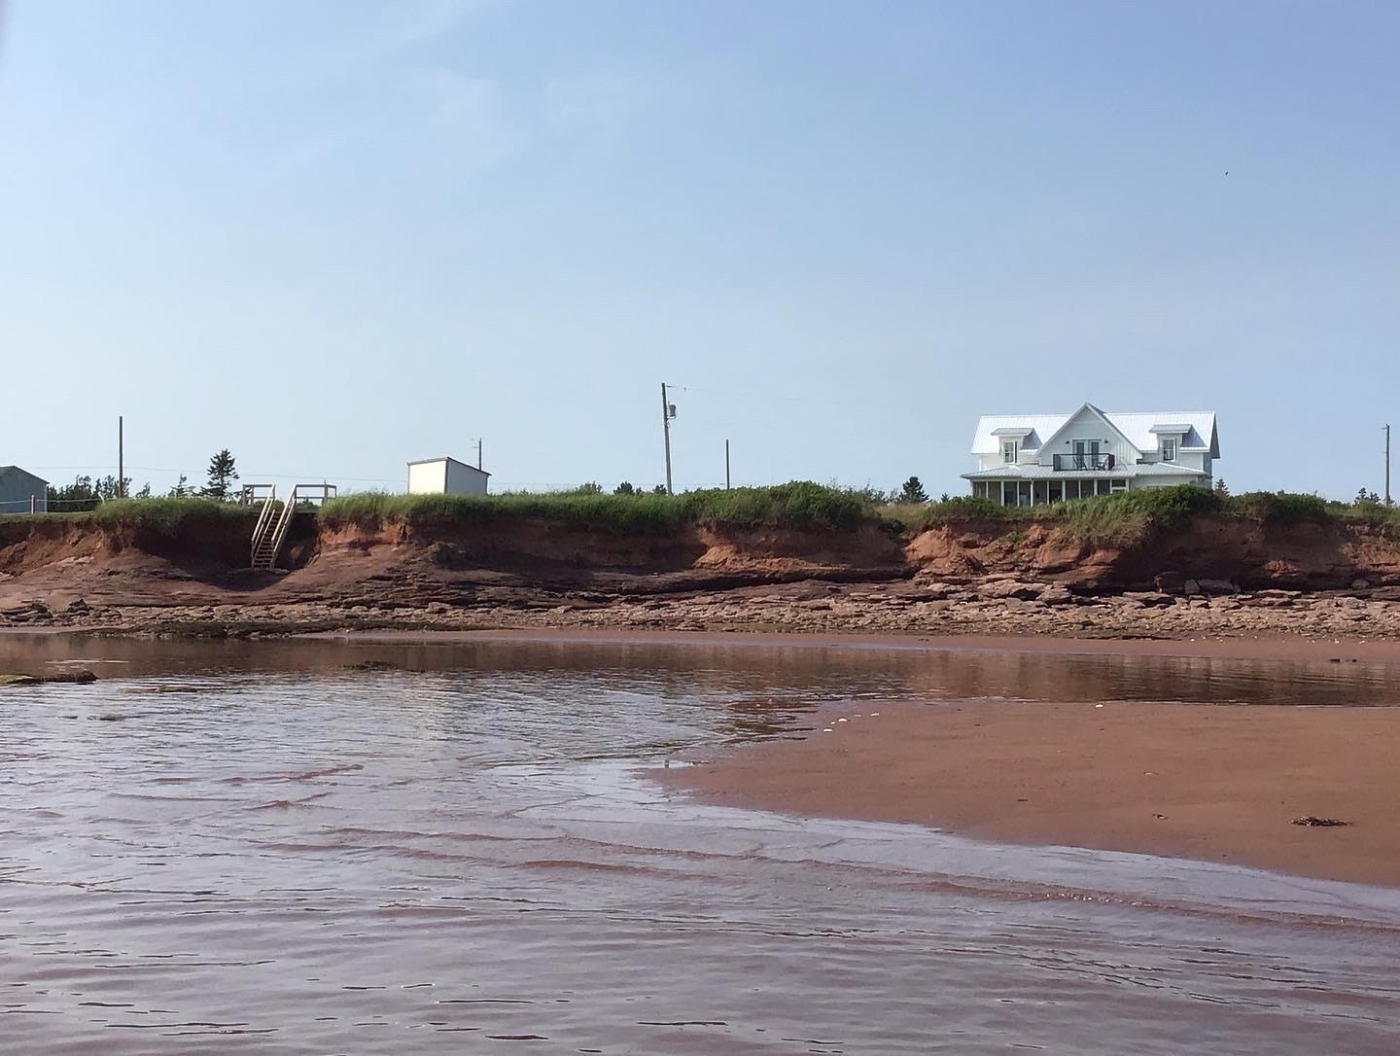 beautiful view from the water showing Gerada's oceanfront Beach House on the high red cliffs